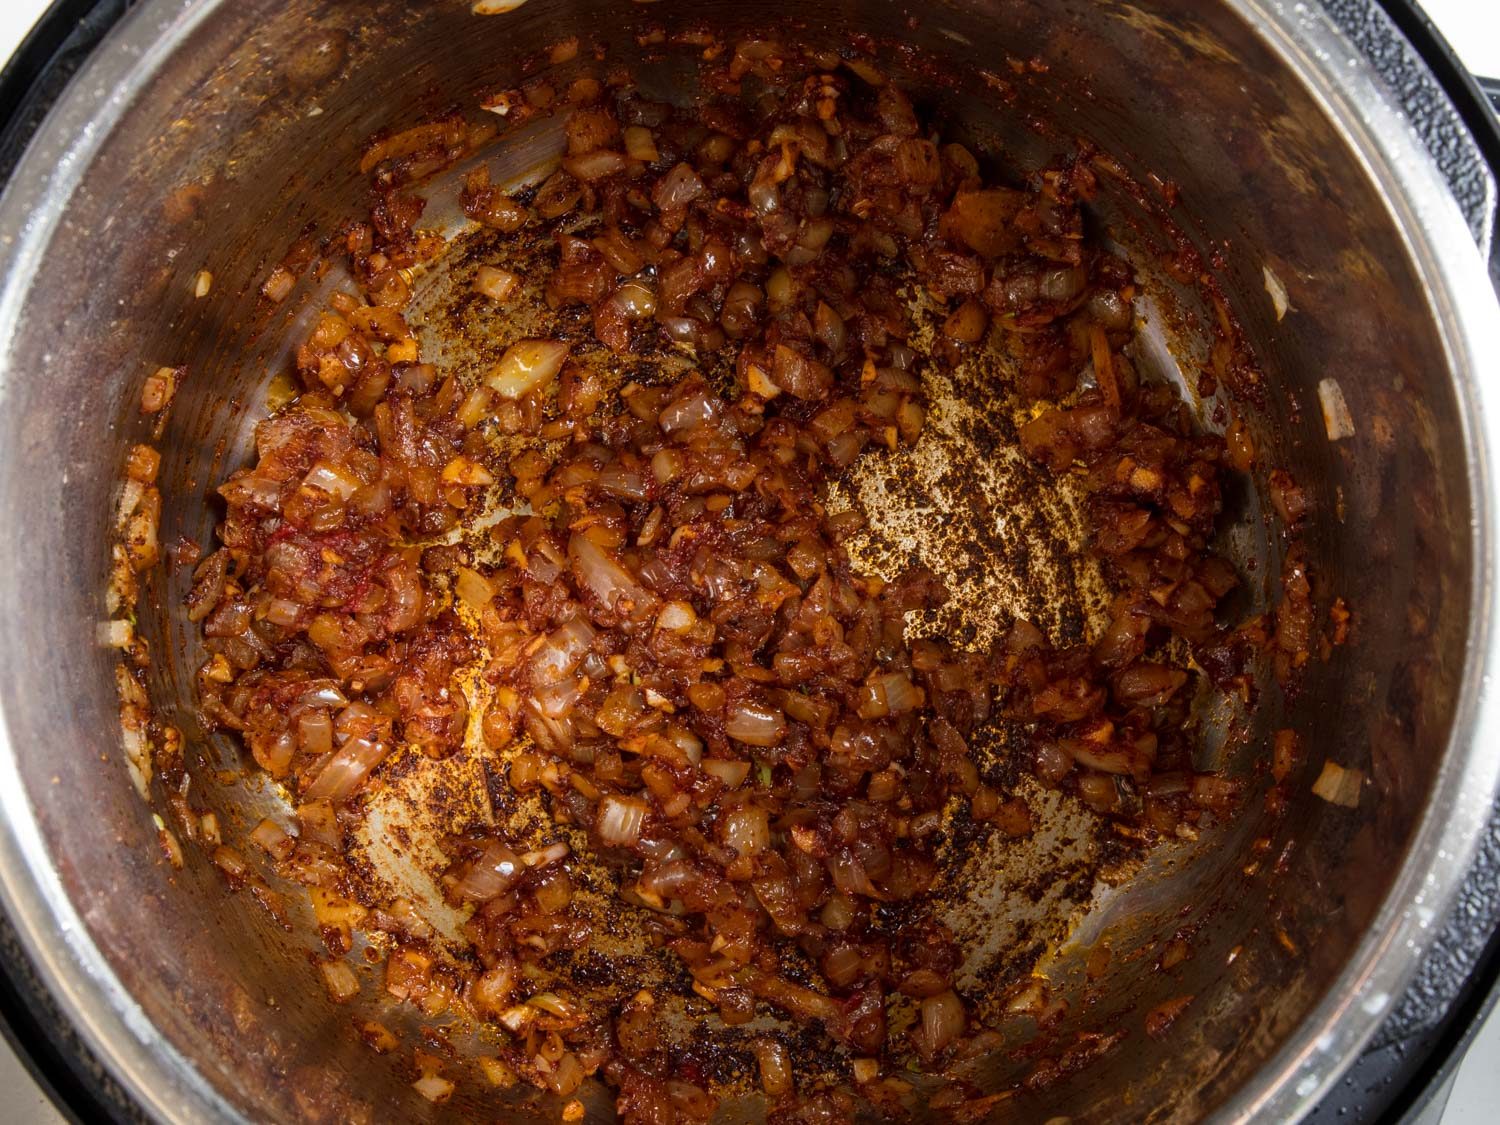 Browning onions in a pressure cooker for chili